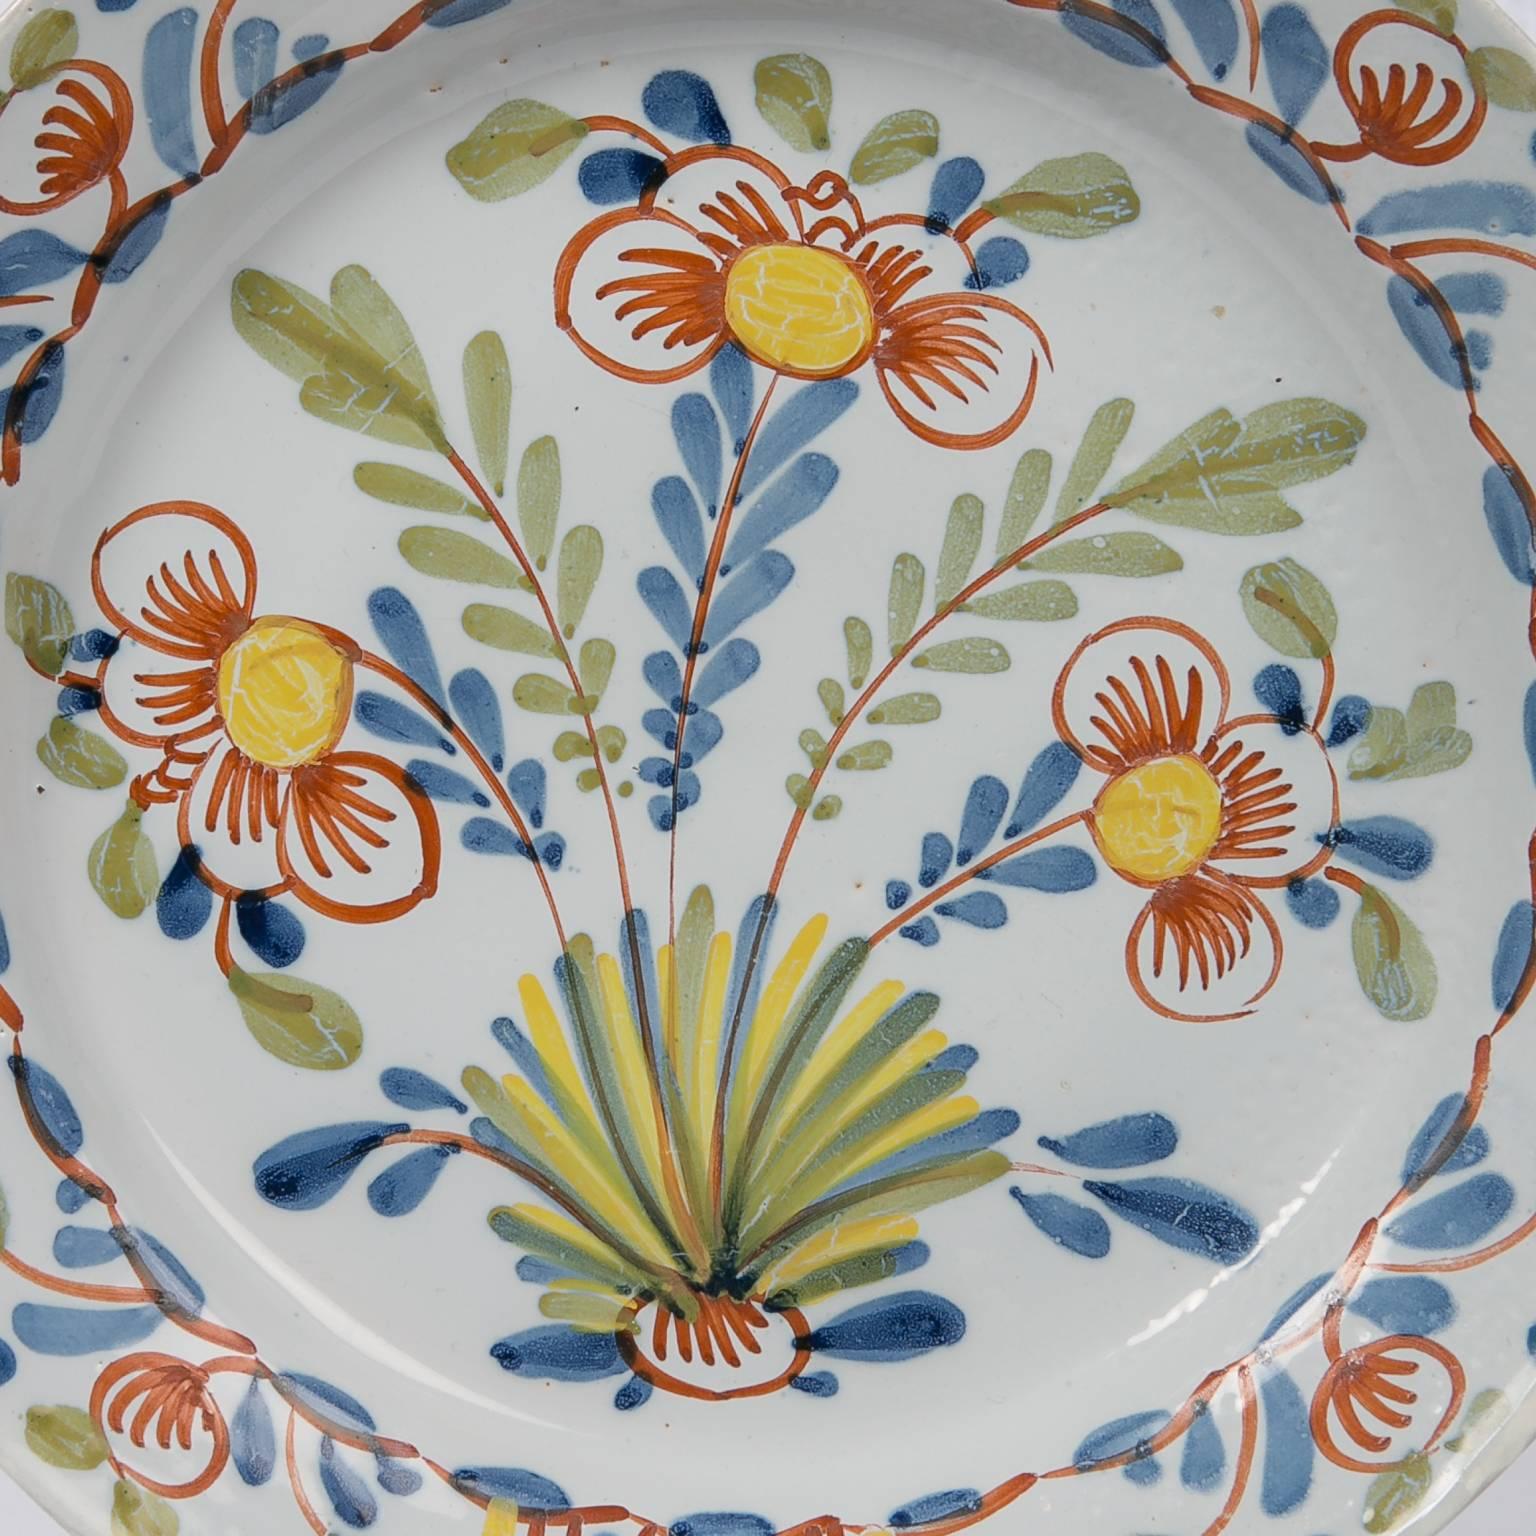 WHY WE LOVE IT: Just dreamy
 This exceptional English Delft charger was hand-painted in the early 18th century. Decorated with tulips painted in soft colors of green, orange, blue, and yellow it is one of the finest polychrome Delft chargers the